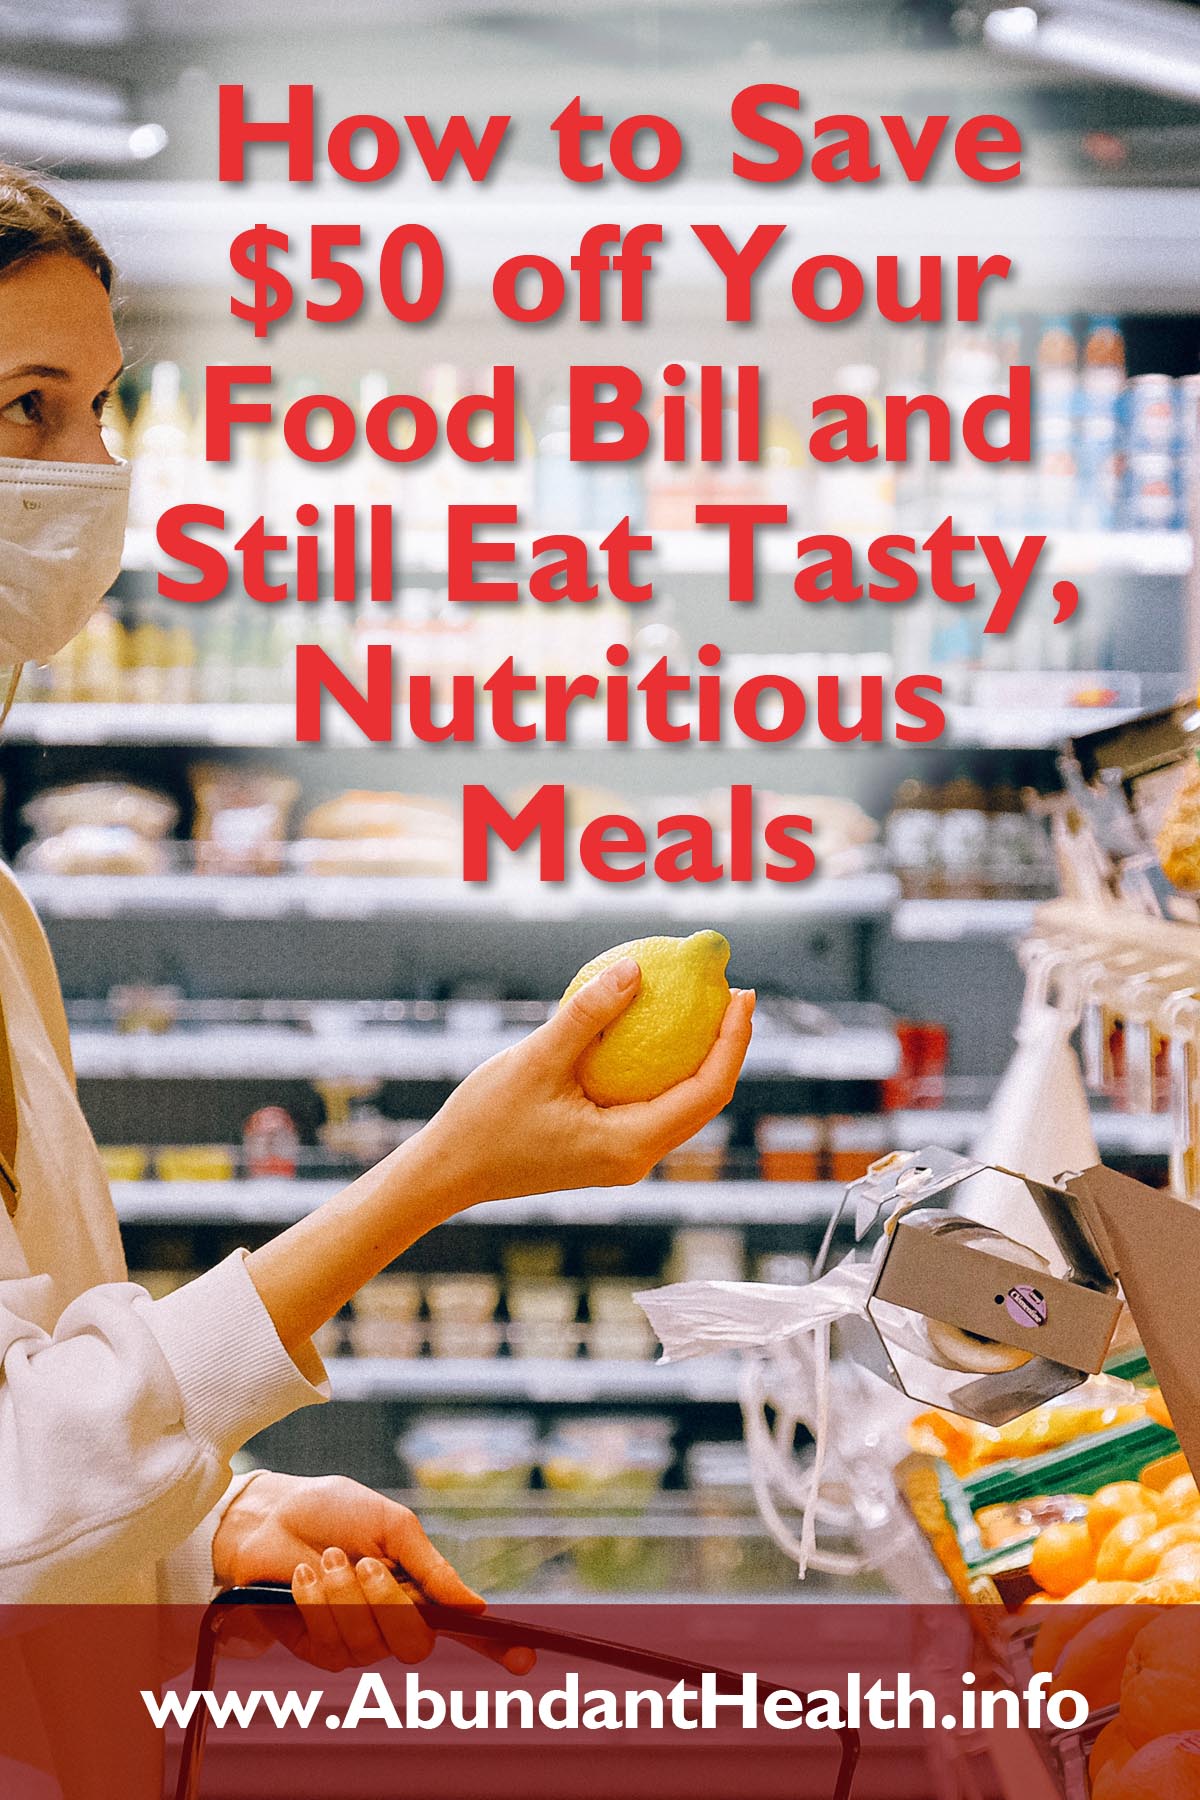 How to Save $50 off Your Food Bill and Still Eat Tasty, Nutritious Meals